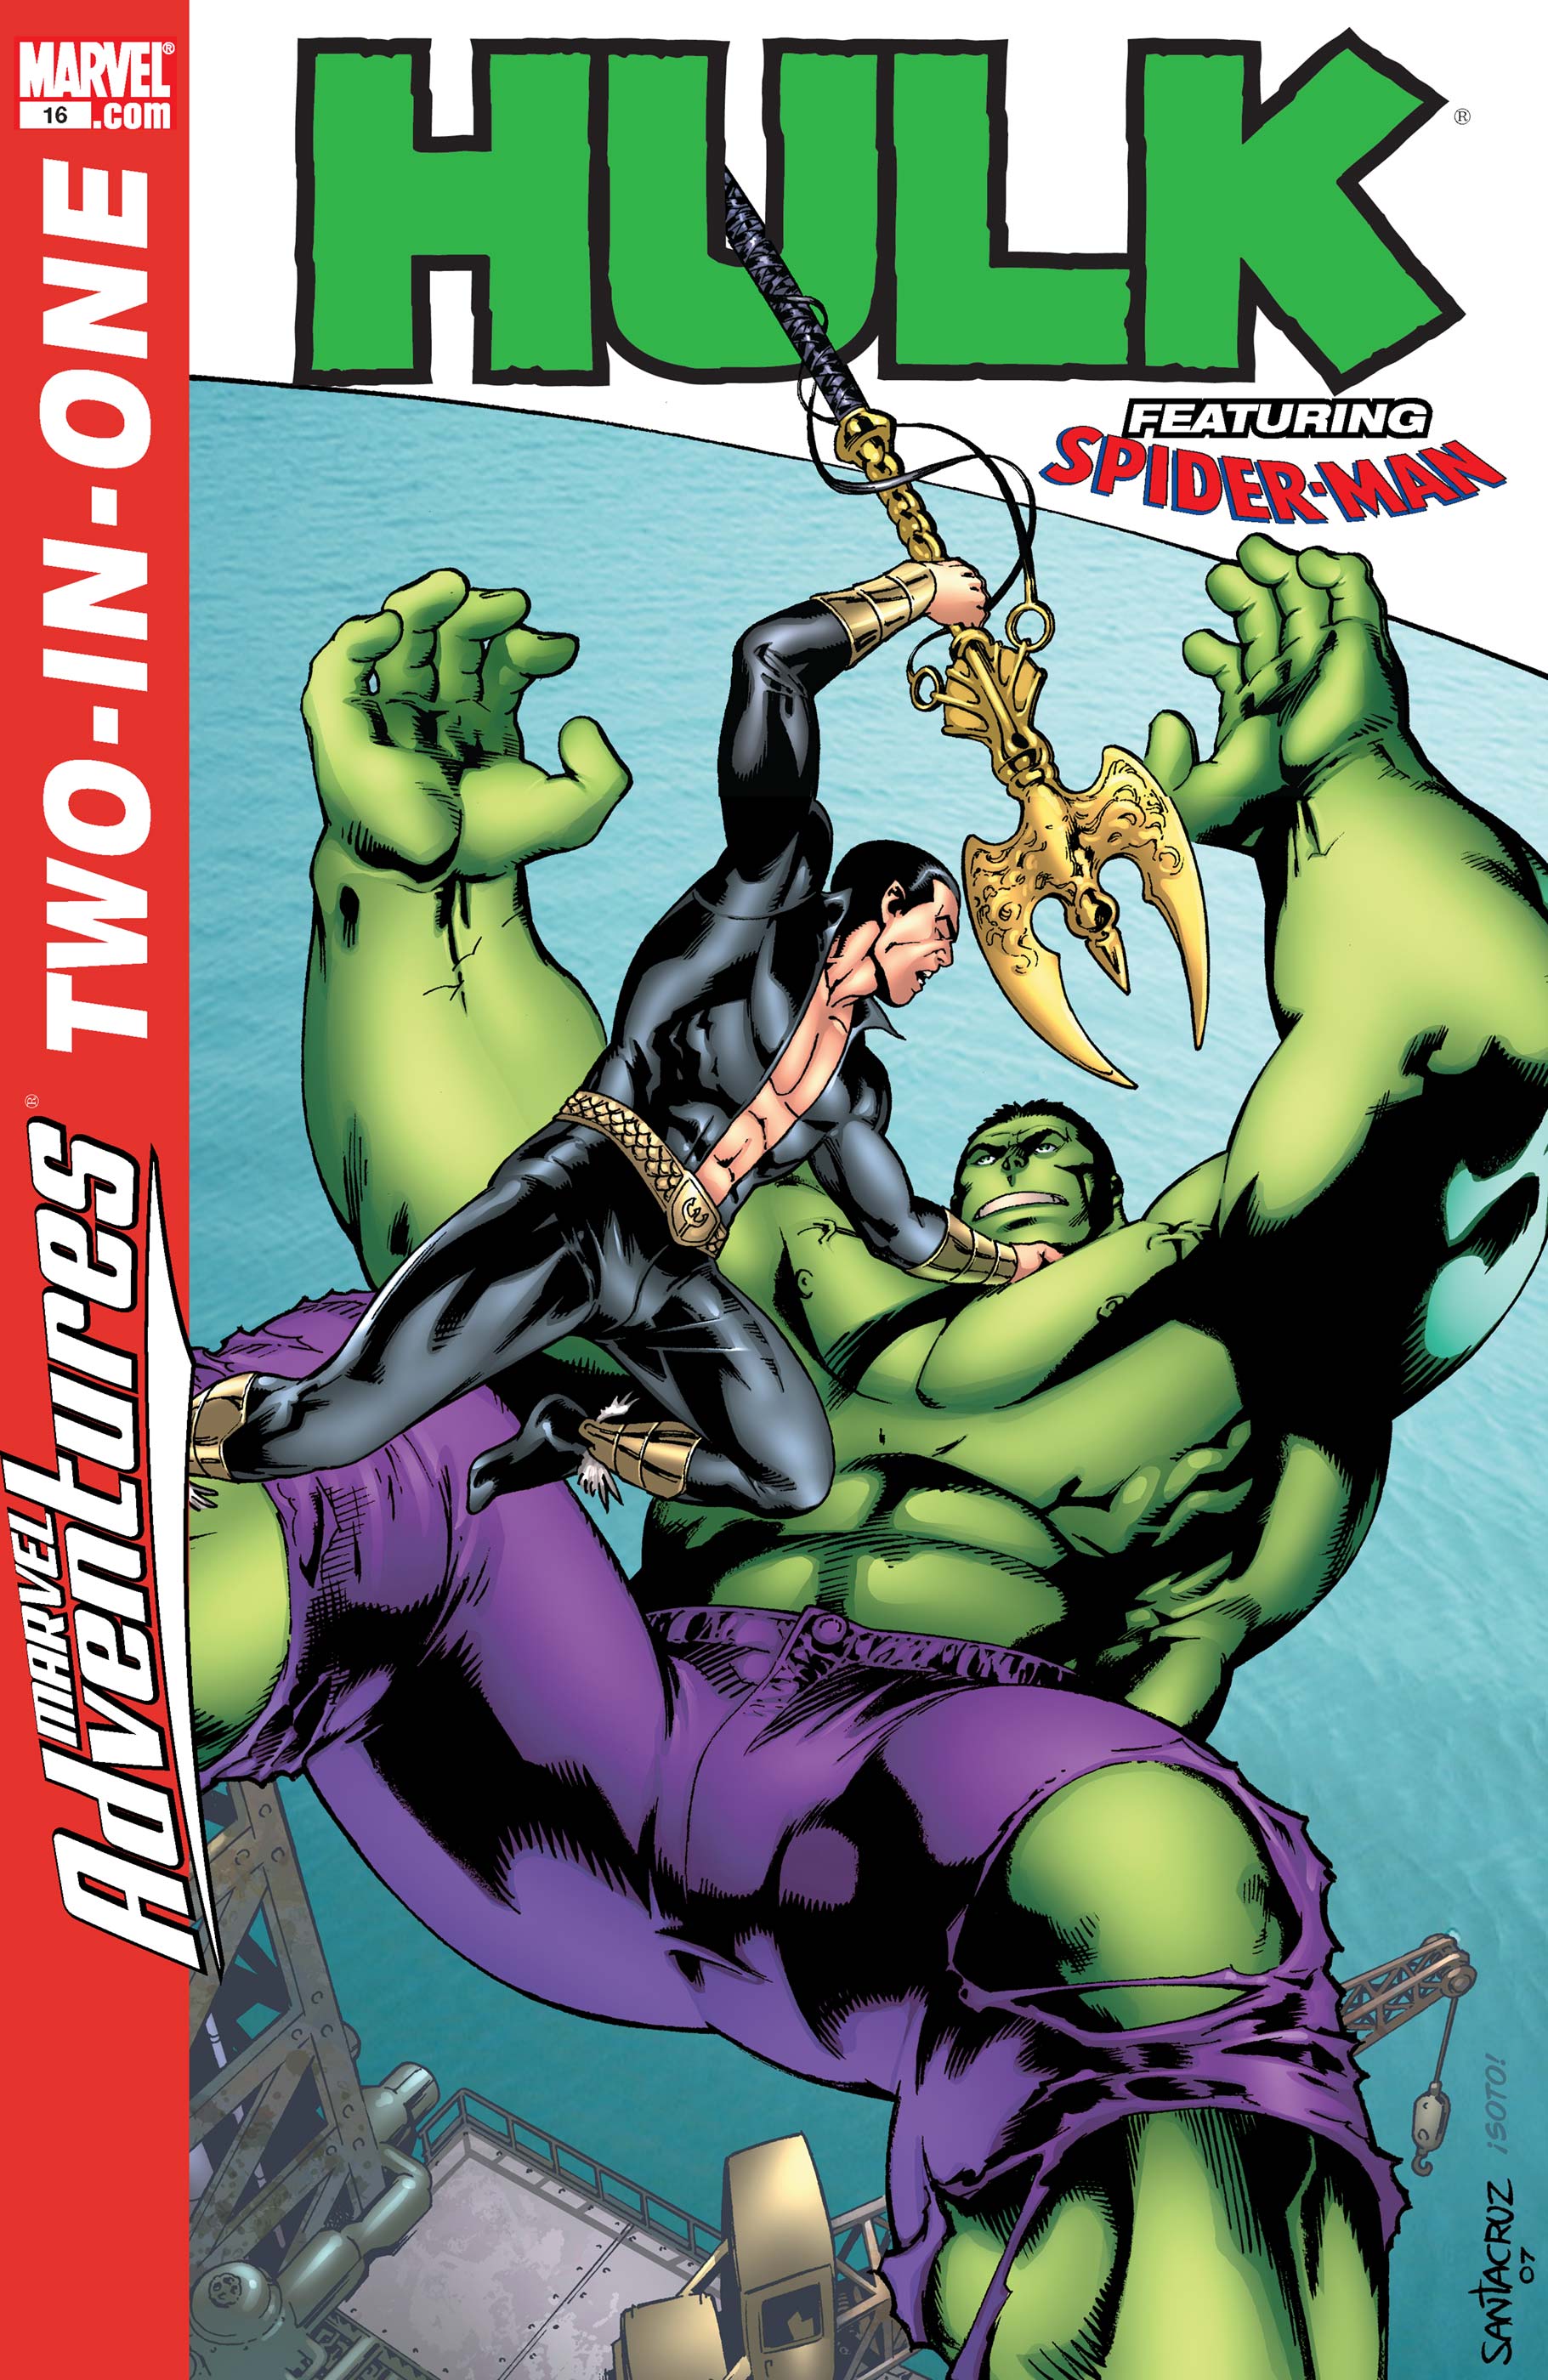 Marvel Adventures Two-in-One (2007) #16